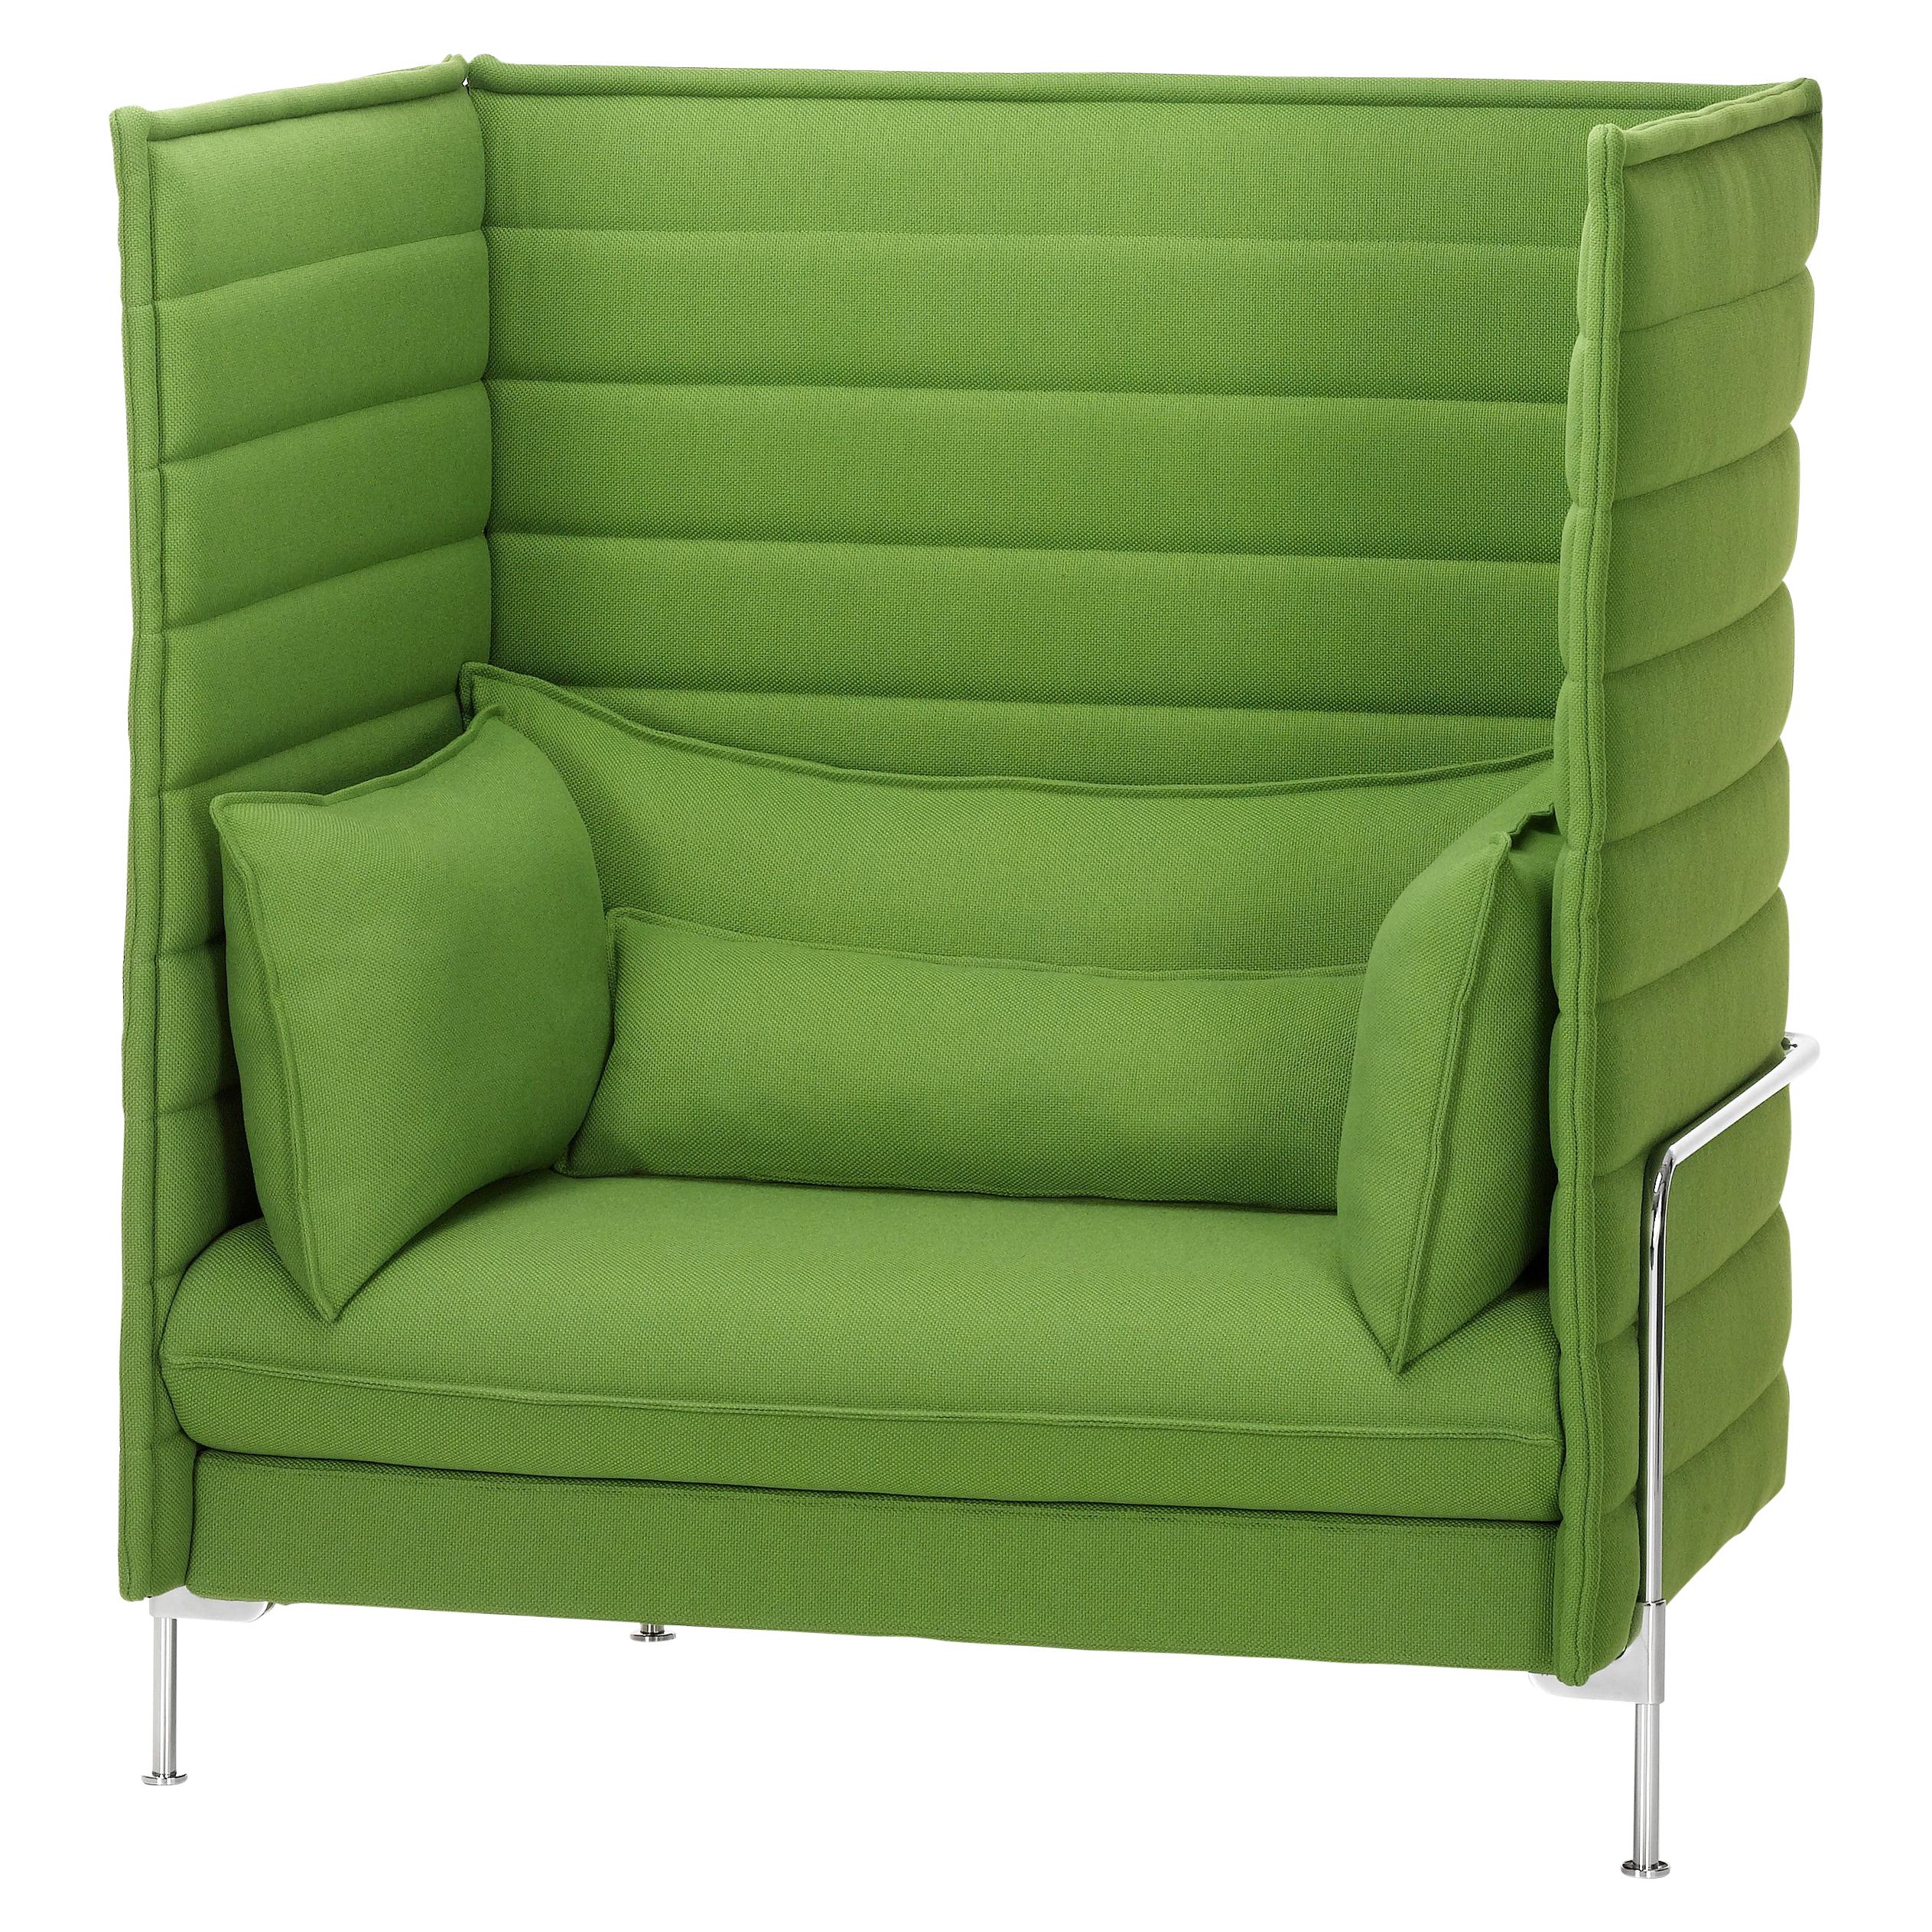 Vitra Alcove Highback Loveseat in Grass Green Laser by Ronan & Erwan Bouroullec For Sale